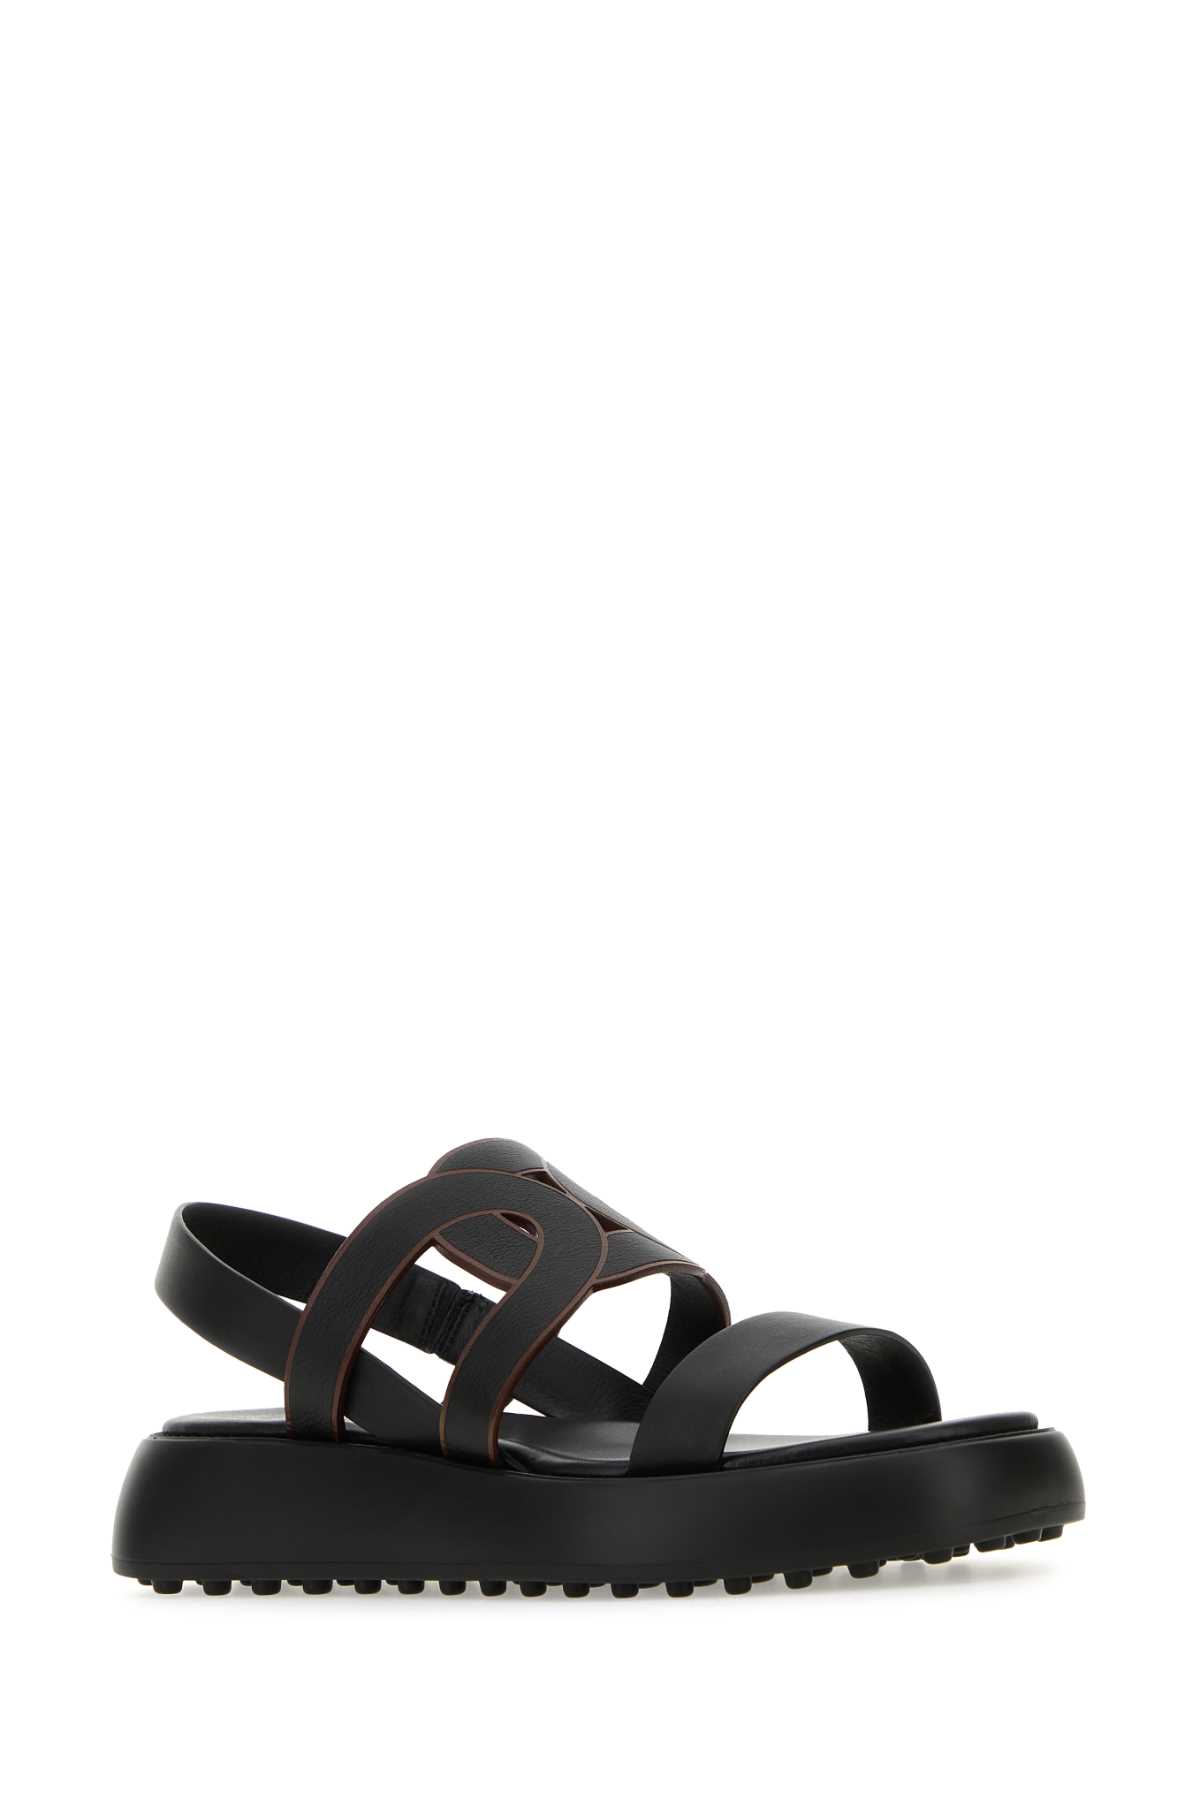 Tod's Black Leather Chain Sandals